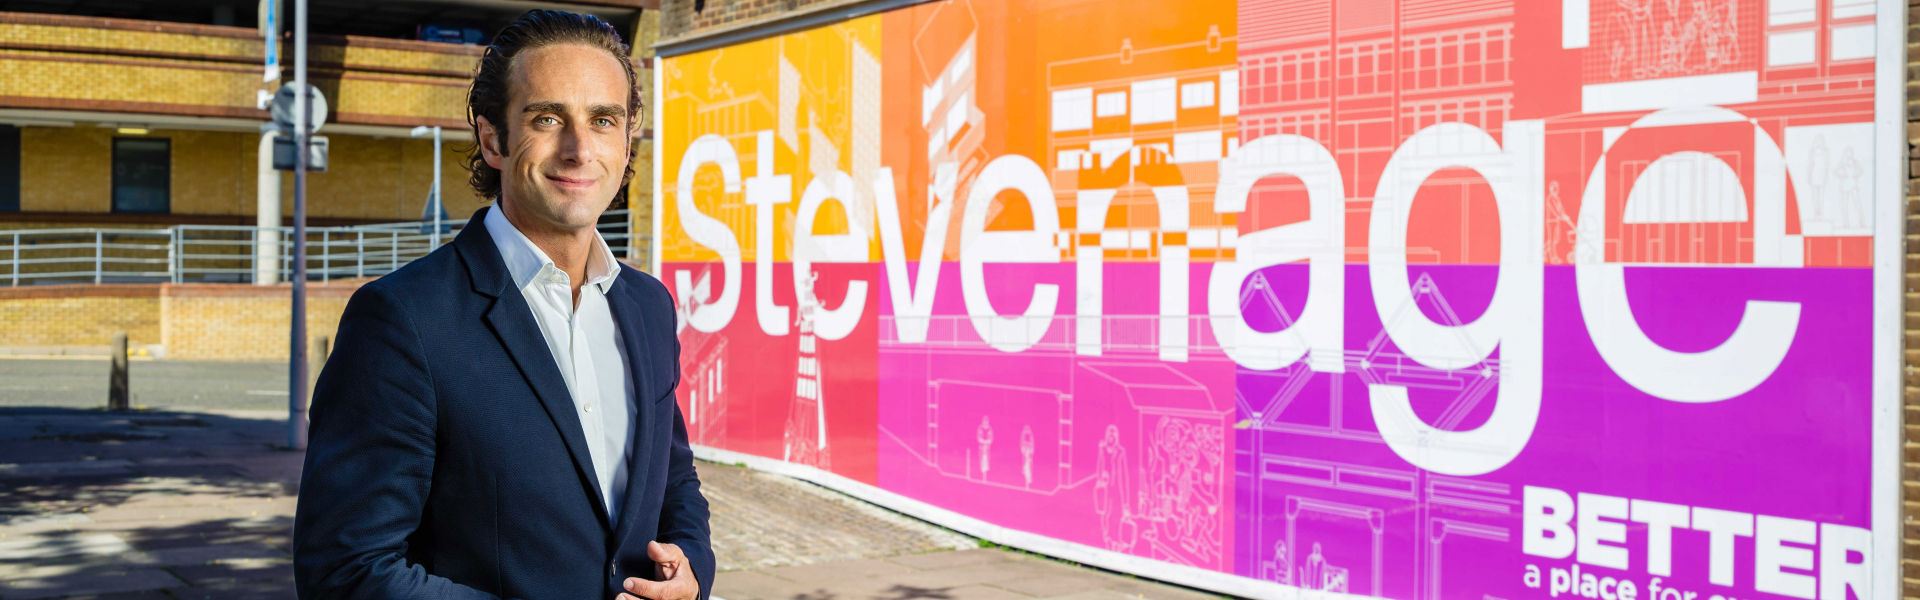 Alex Clarkson standing in front of the Stevenage sign in the town centre.